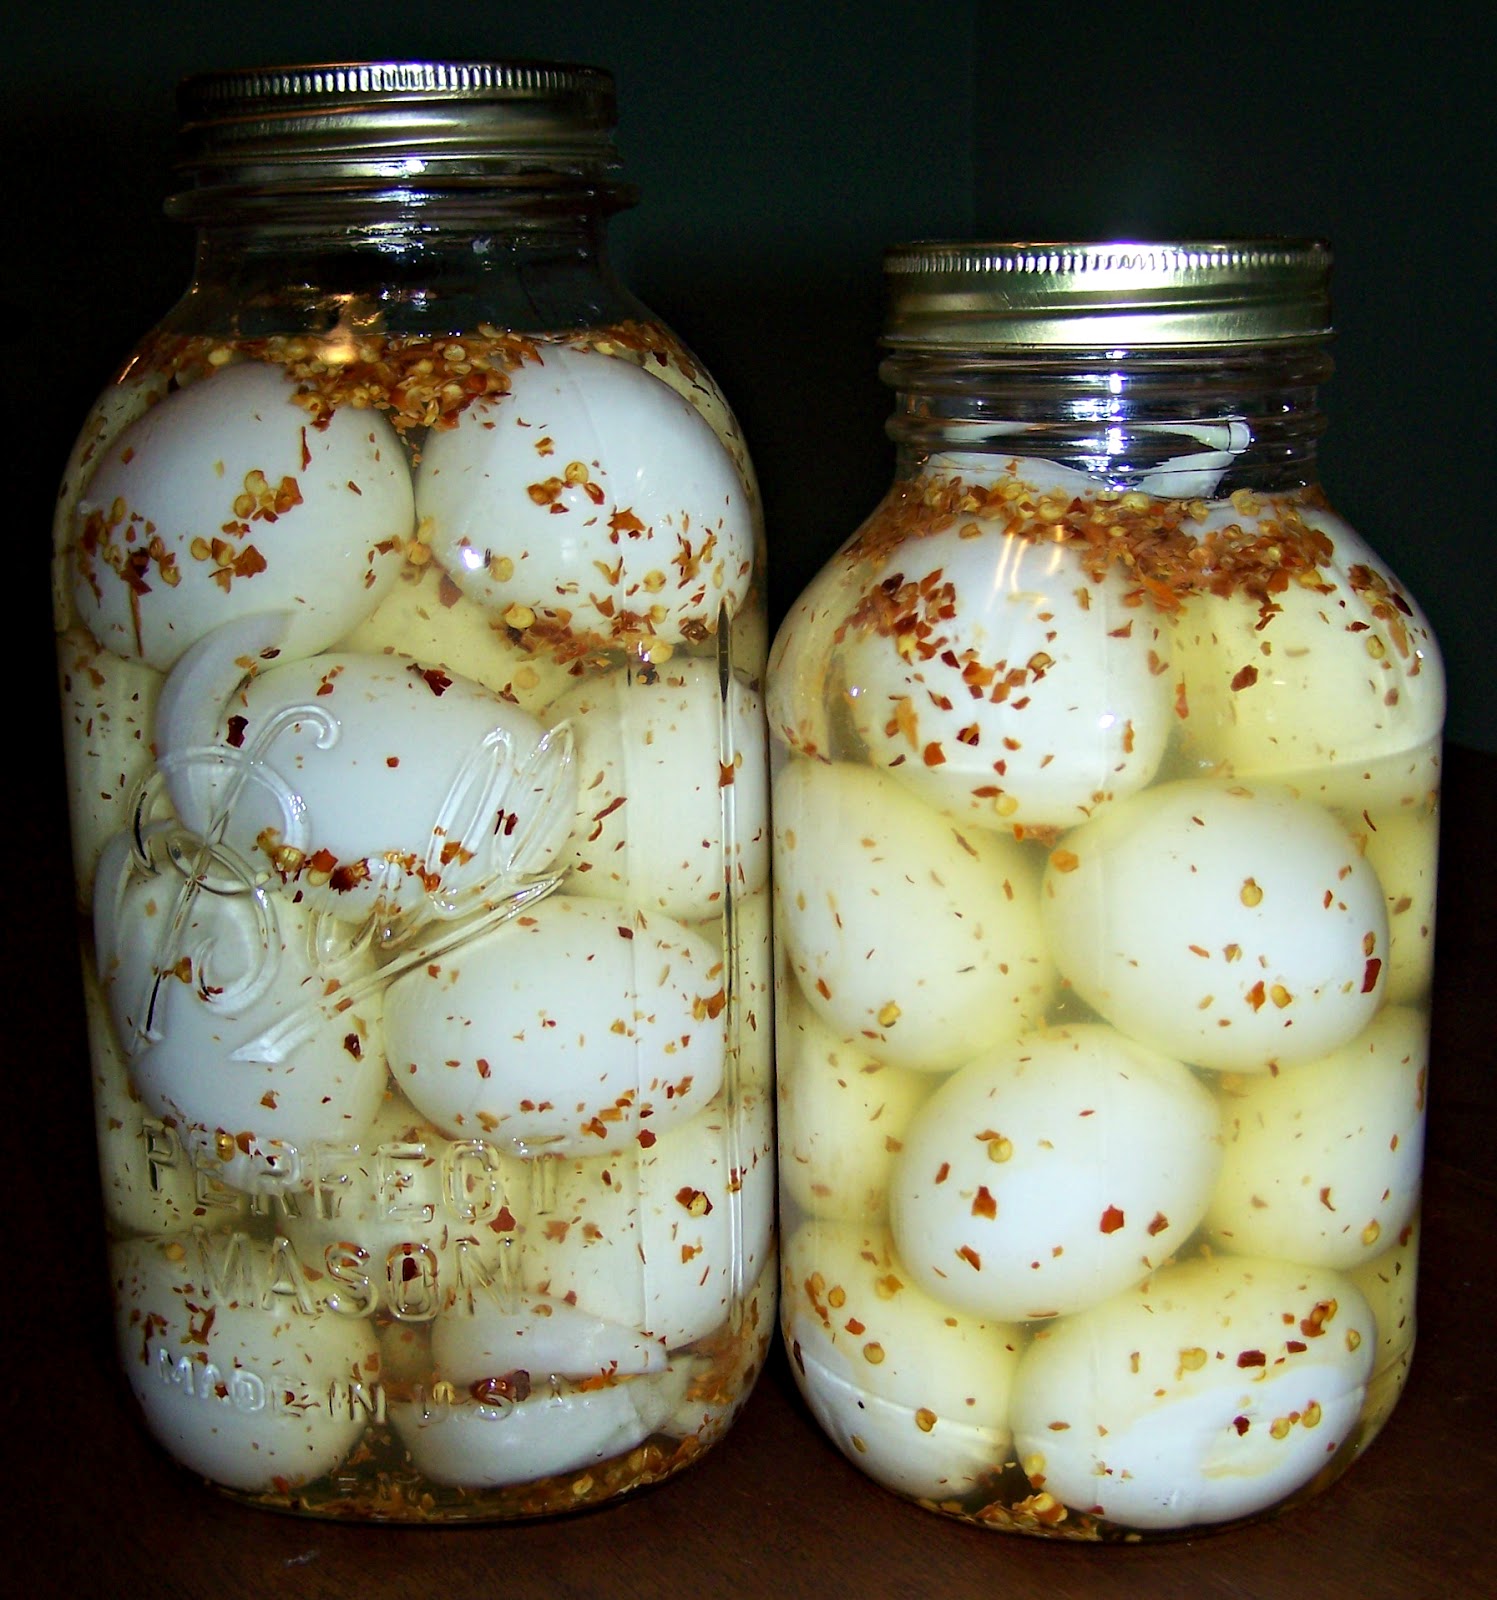 How do you make canned pickled eggs?